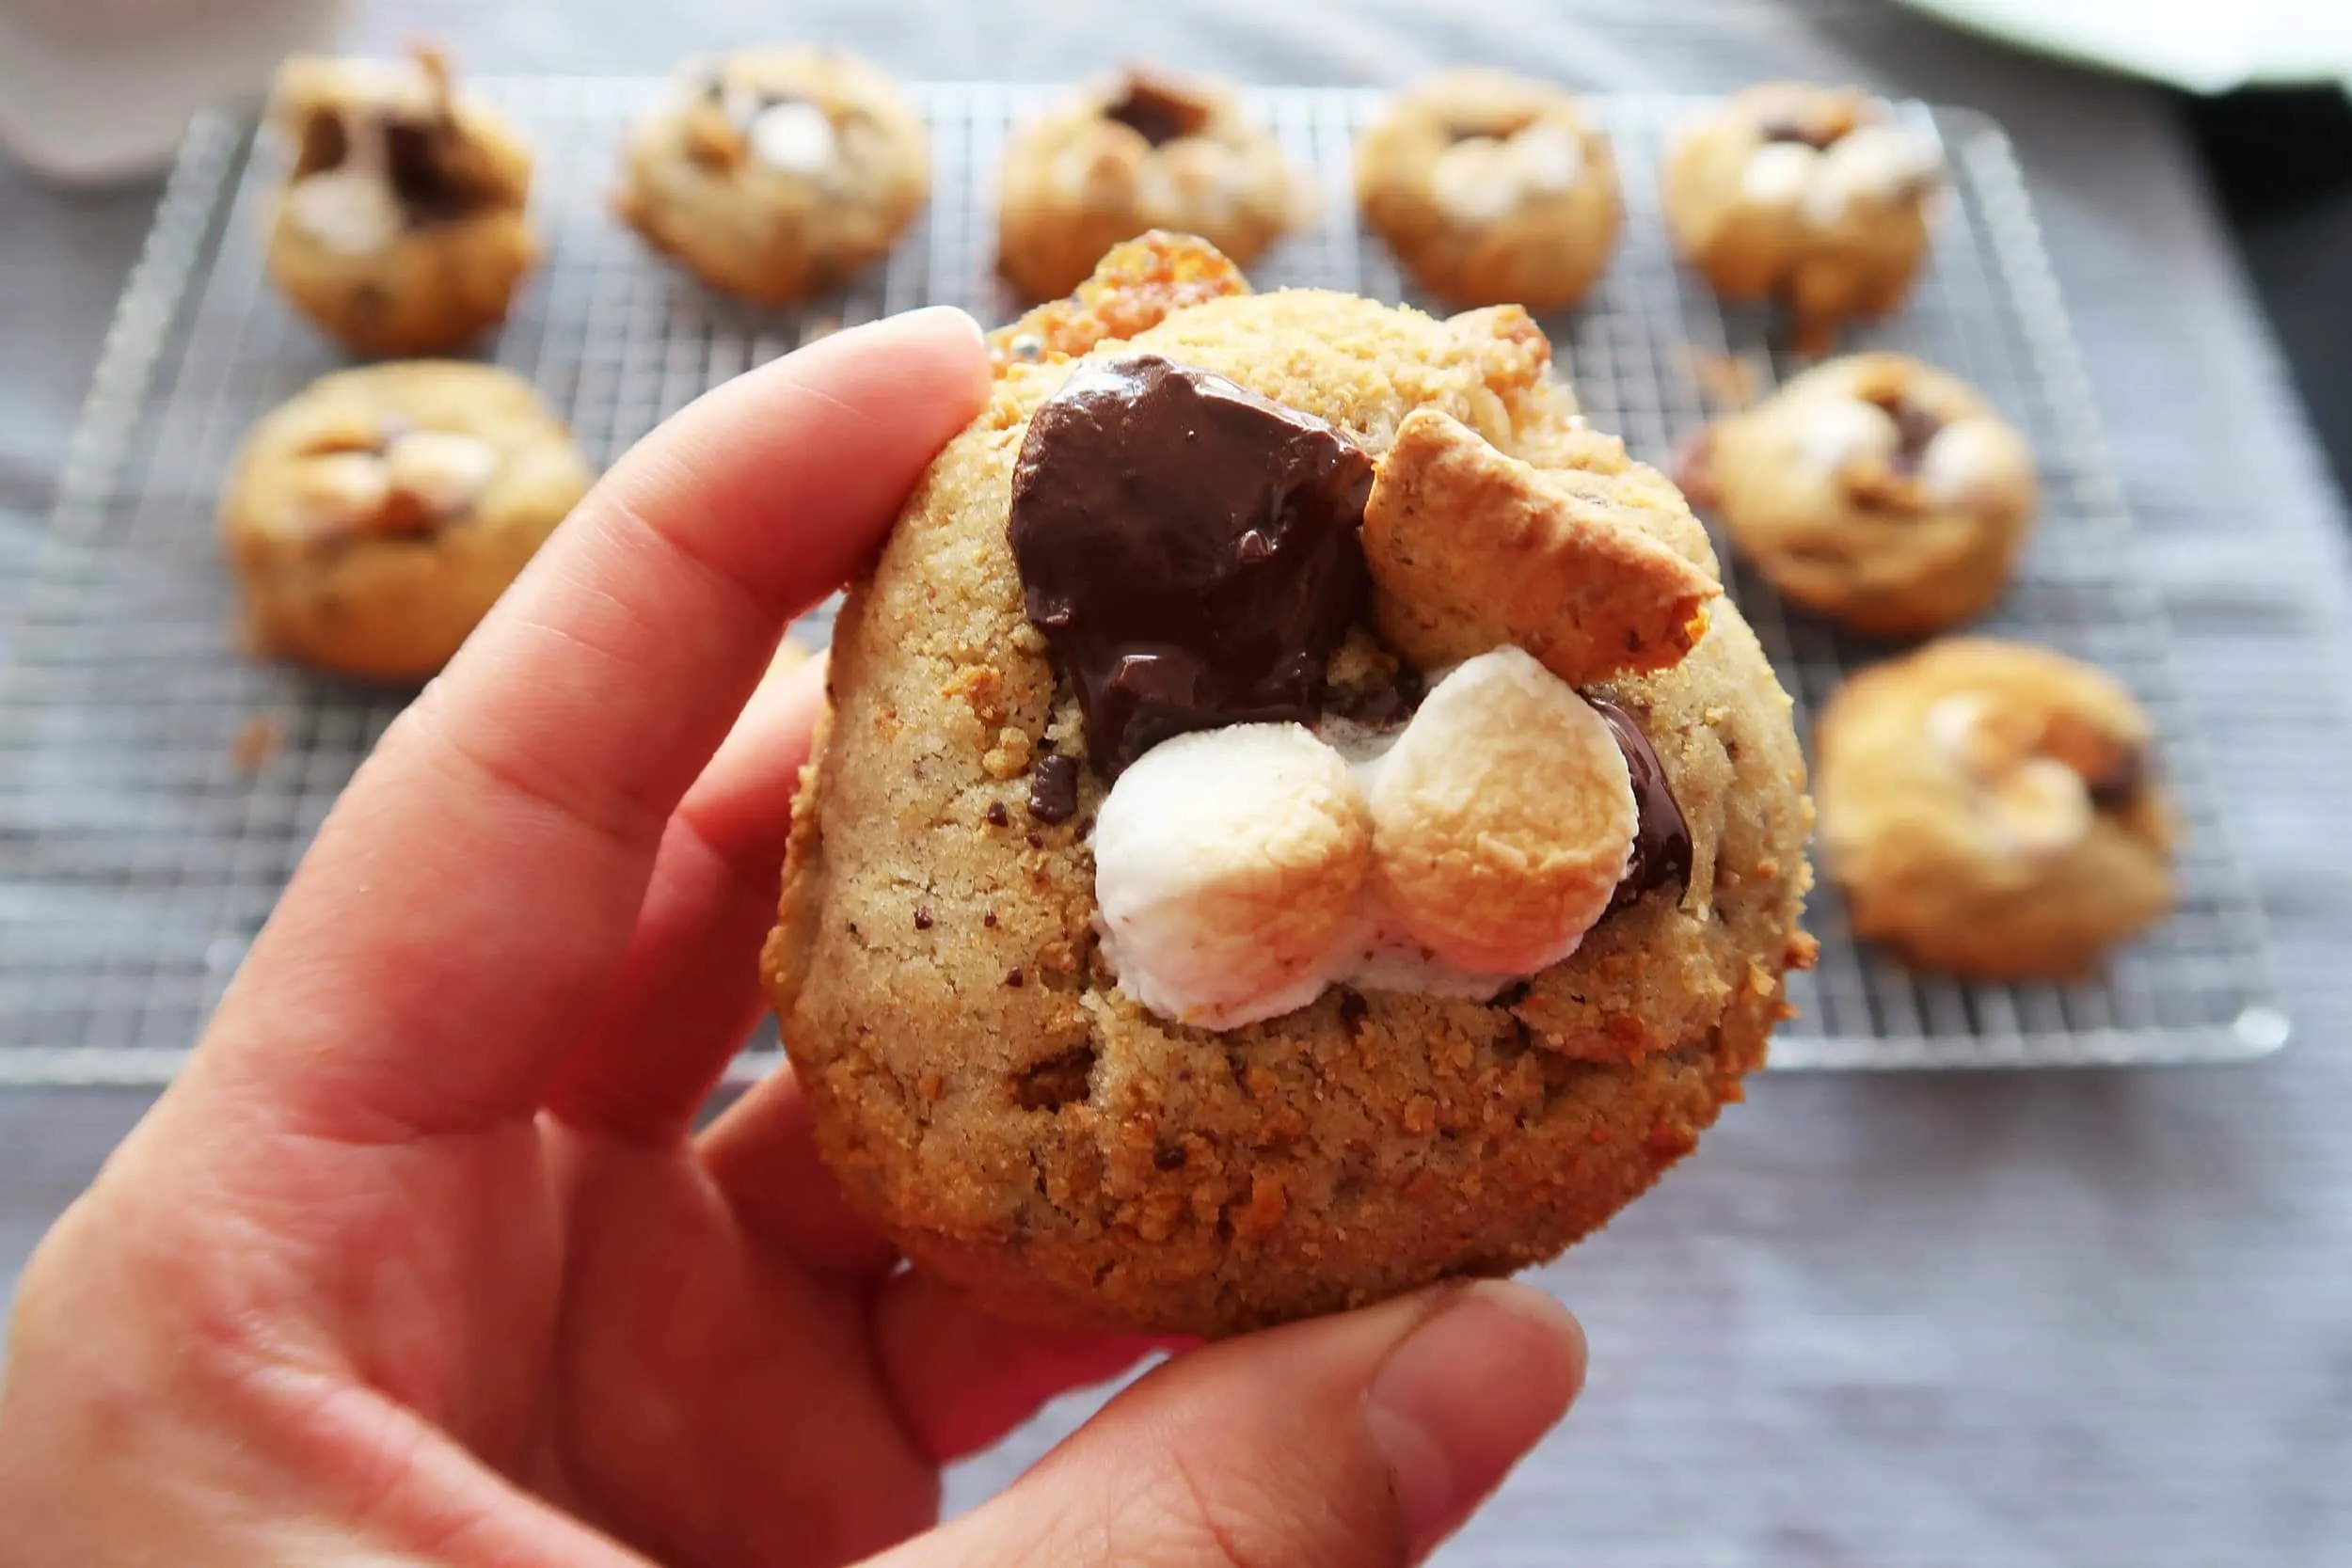 A close up of a Soft and Chewy S'more Cookie.